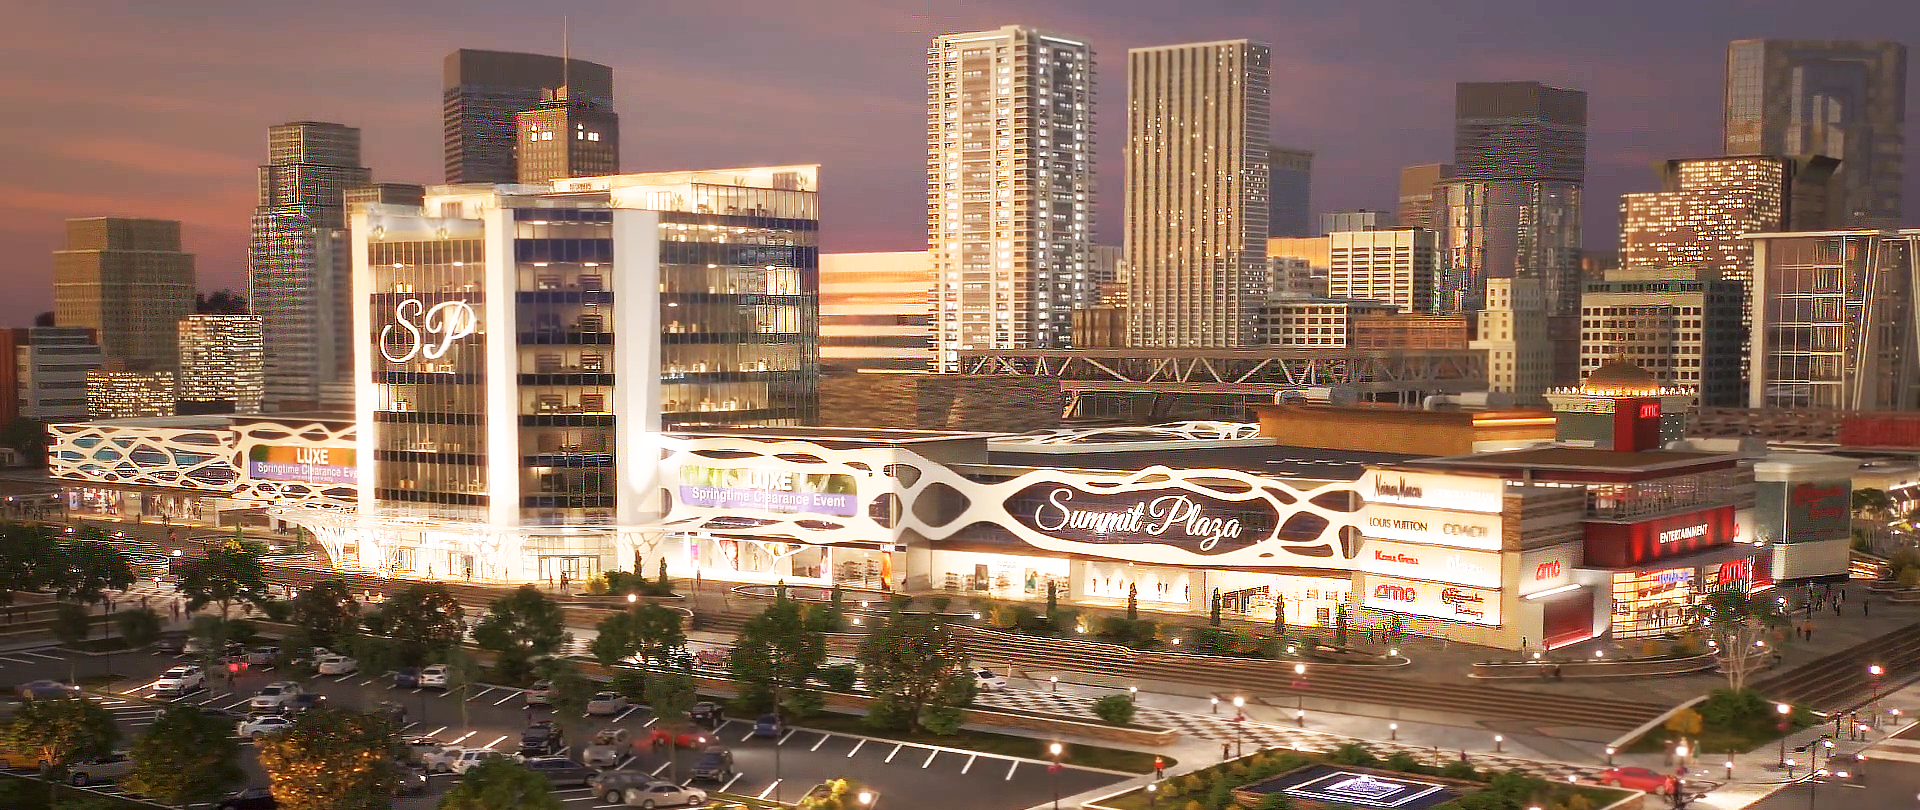 This is a 3D rendered image from Trinity's real estate renderings exhibiting the Summit Plaza Mall. This shot provides an overlook of the Summit Plaza Mall from a distance during the evening, featuring the city skyline behind it. Lighting is controlled inside of 3D software to realistically simulate how the mall will look at night.